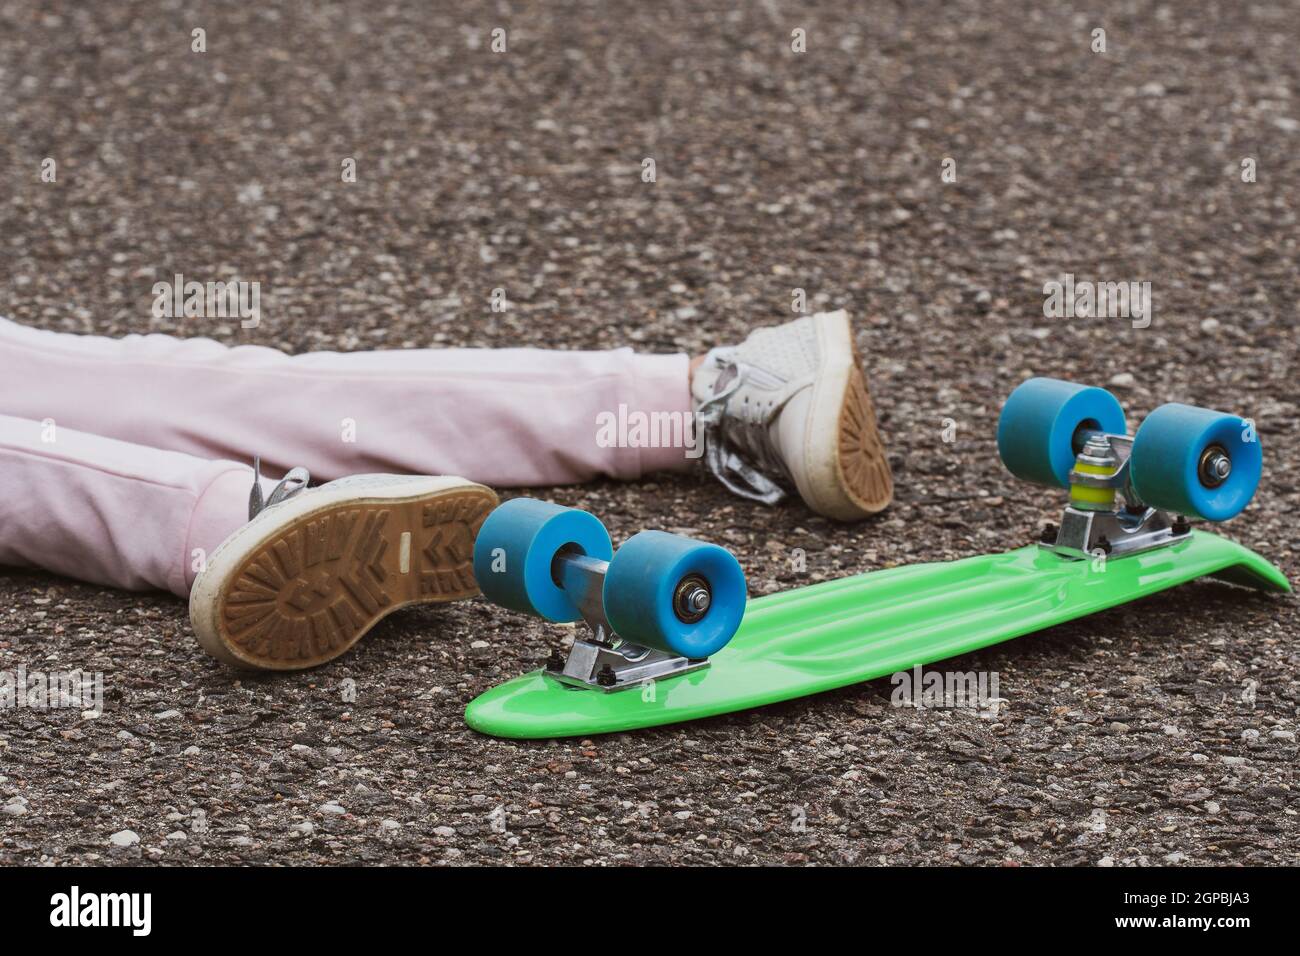 Skateboard Injury High Resolution Stock Photography and Images - Alamy